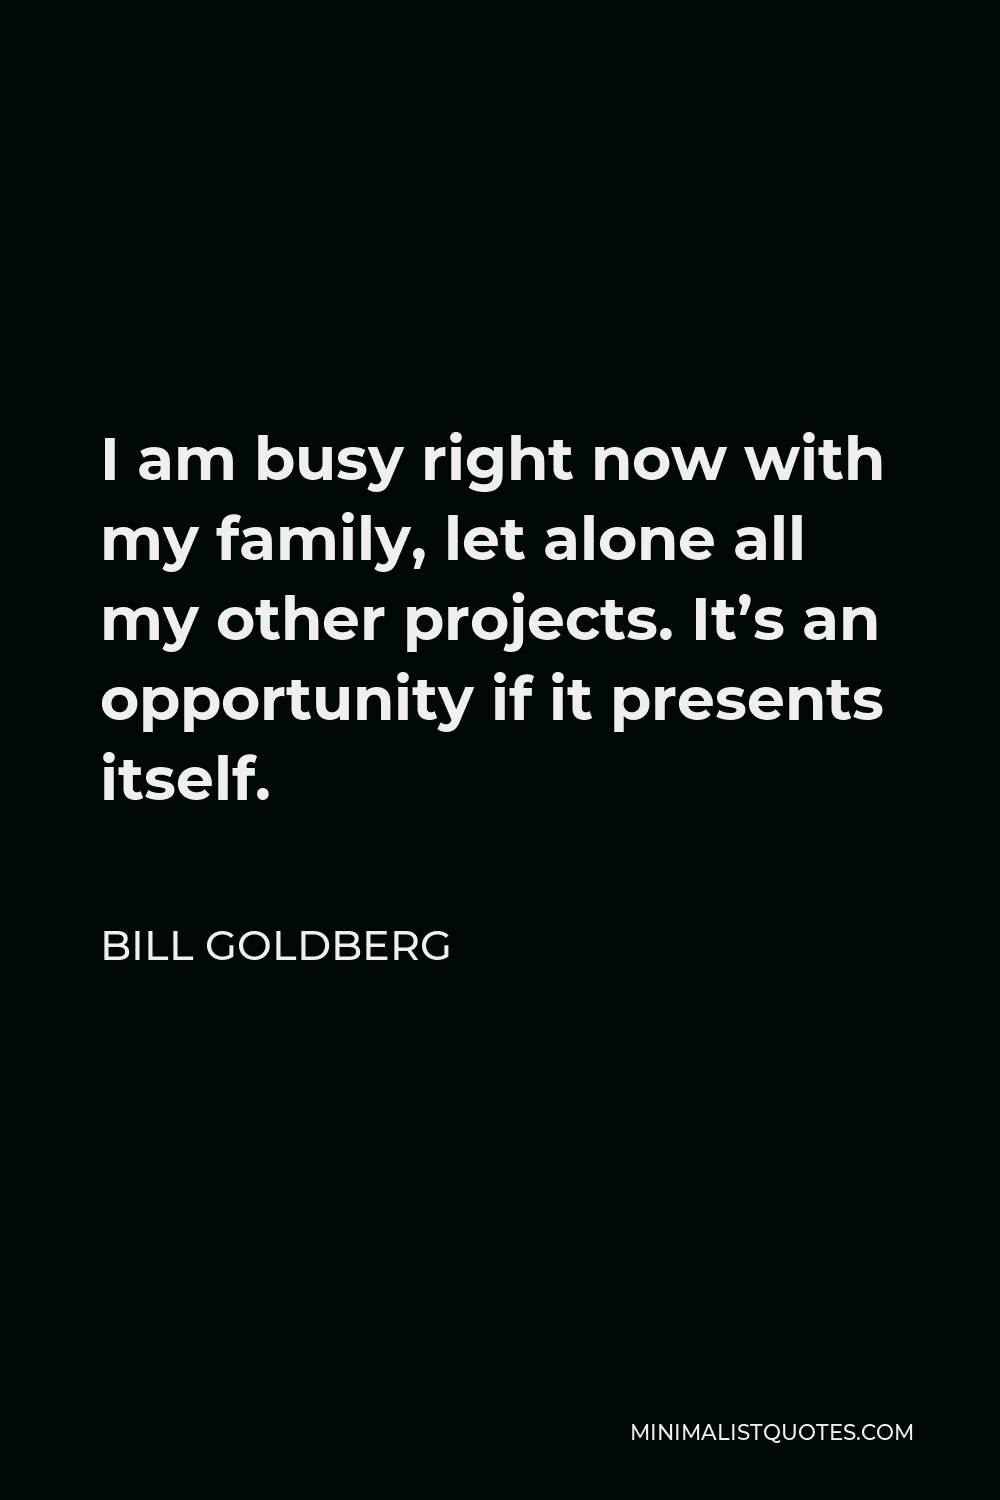 Bill Goldberg Quote - I am busy right now with my family, let alone all my other projects. It’s an opportunity if it presents itself.